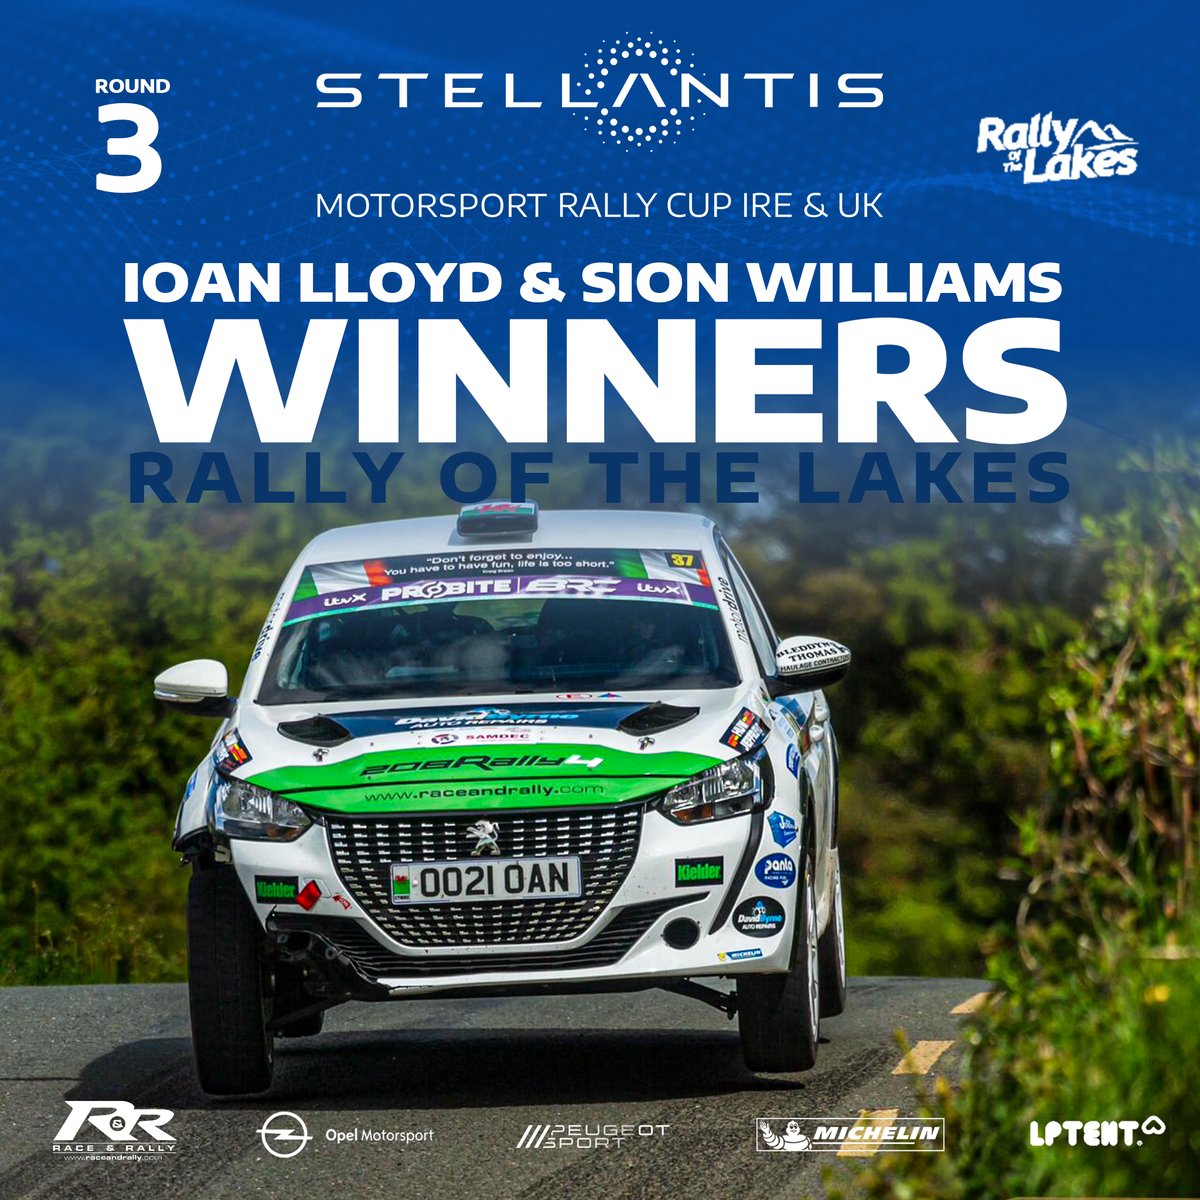 📌 @irishtarmactroa - @rallyofthelakes
🏆 Stellantis Motorsport Rally Cup IRE & UK Round 3 Winners 🏆

Ioan Lloyd & Sion Williams take their second victory of the season, with a stellar win at Rally of the Lakes!

#PeugeotSport #StellantisRally